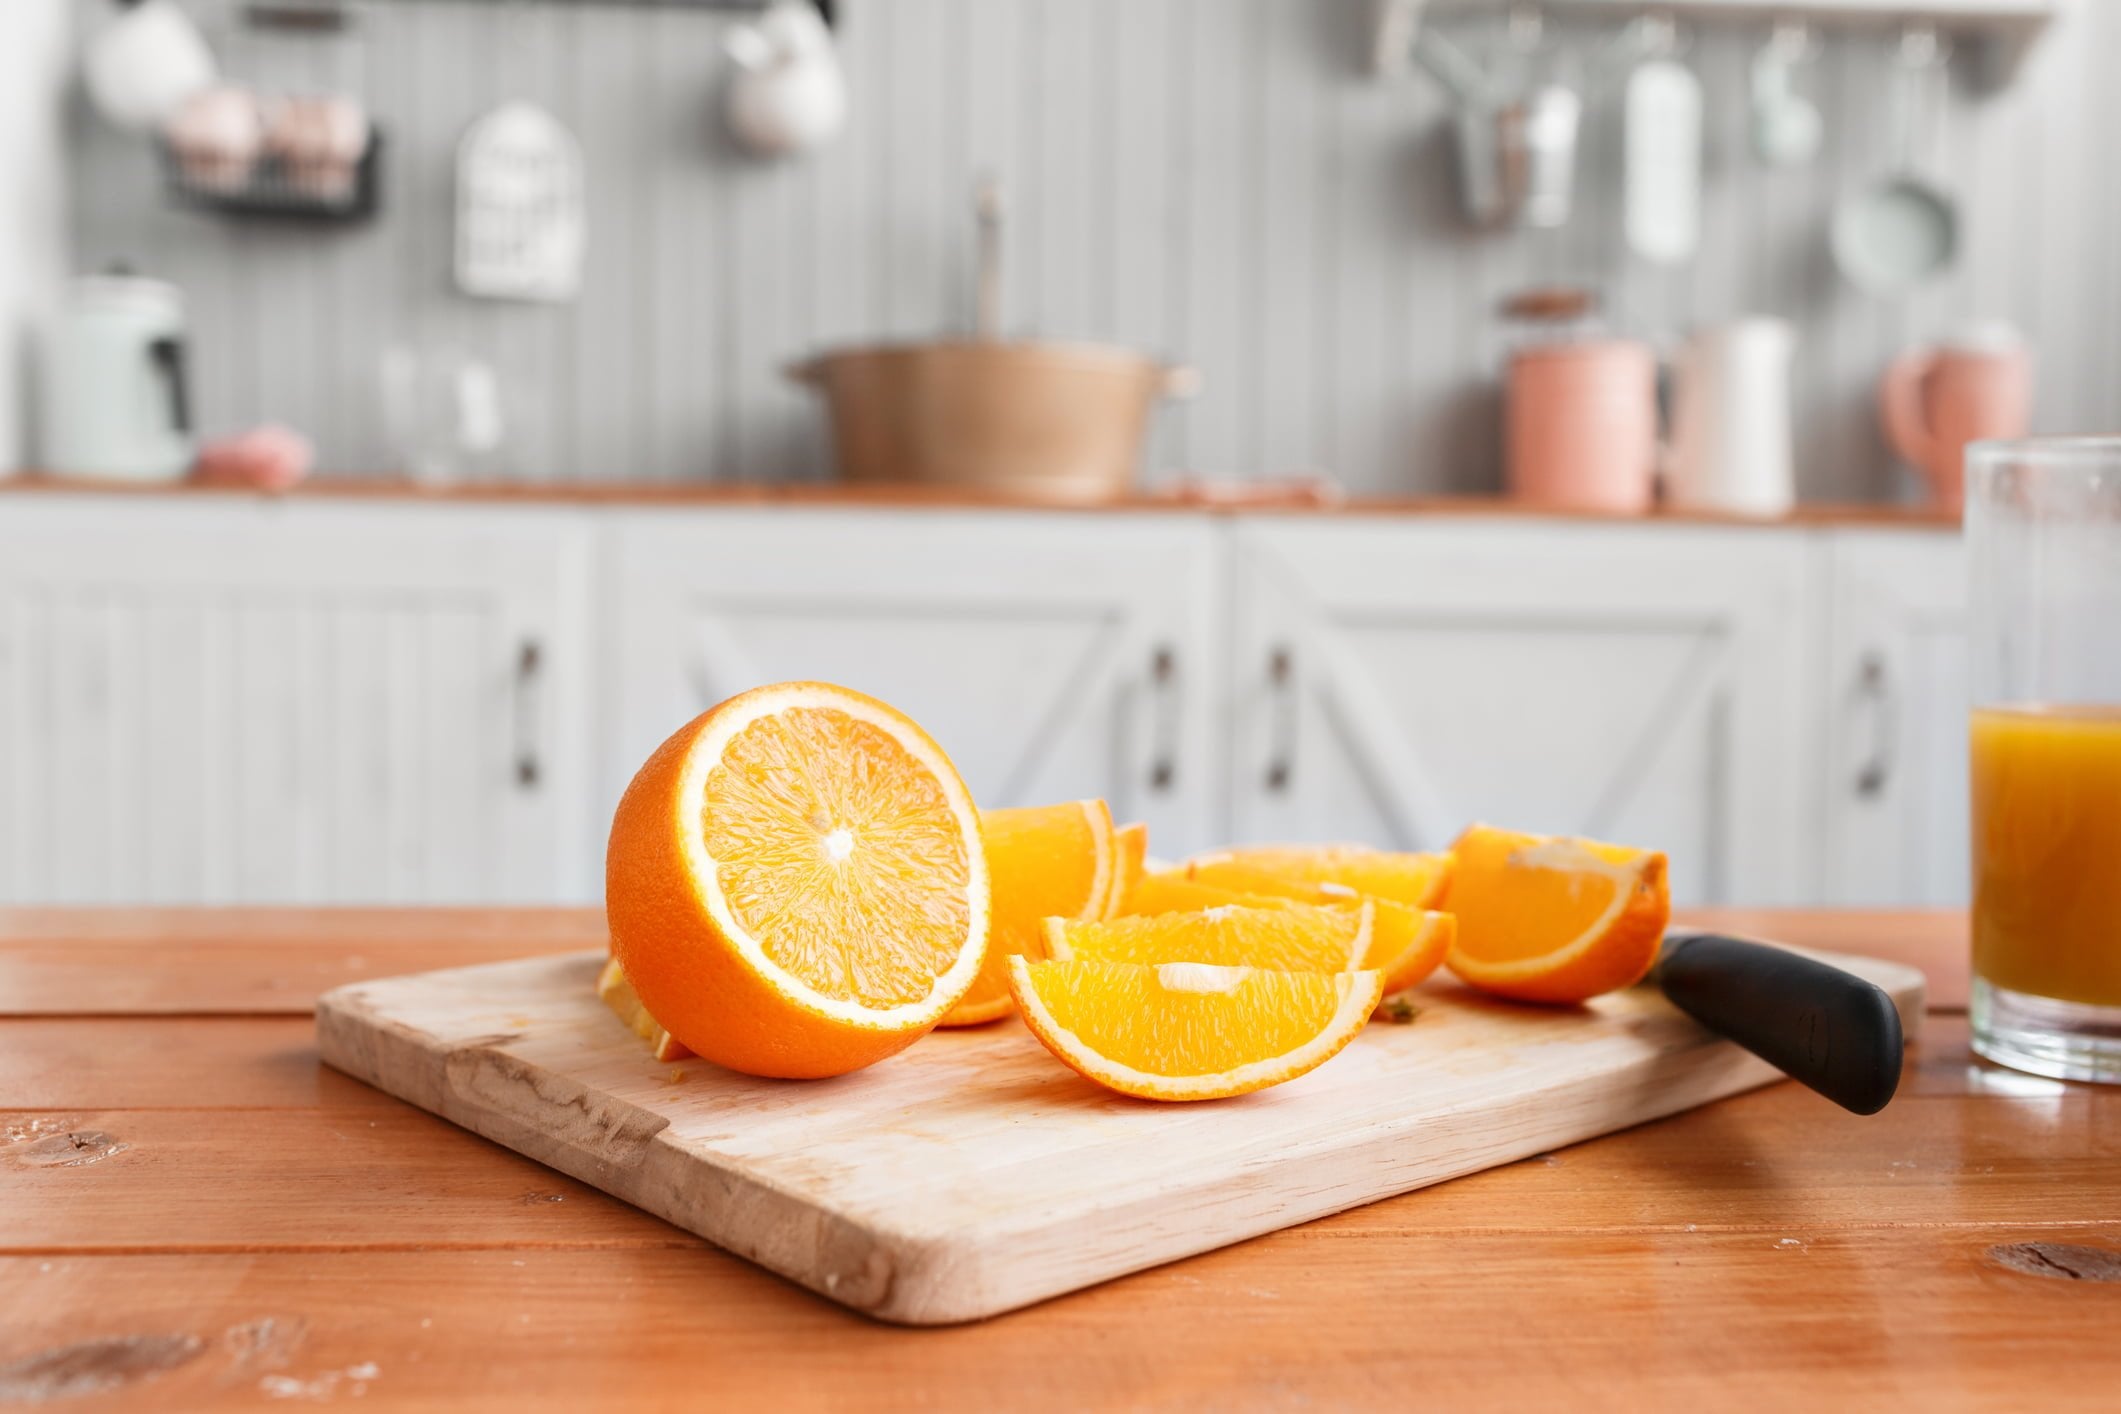 How exactly does Vitamin C help your immune system fight off colds and flu?